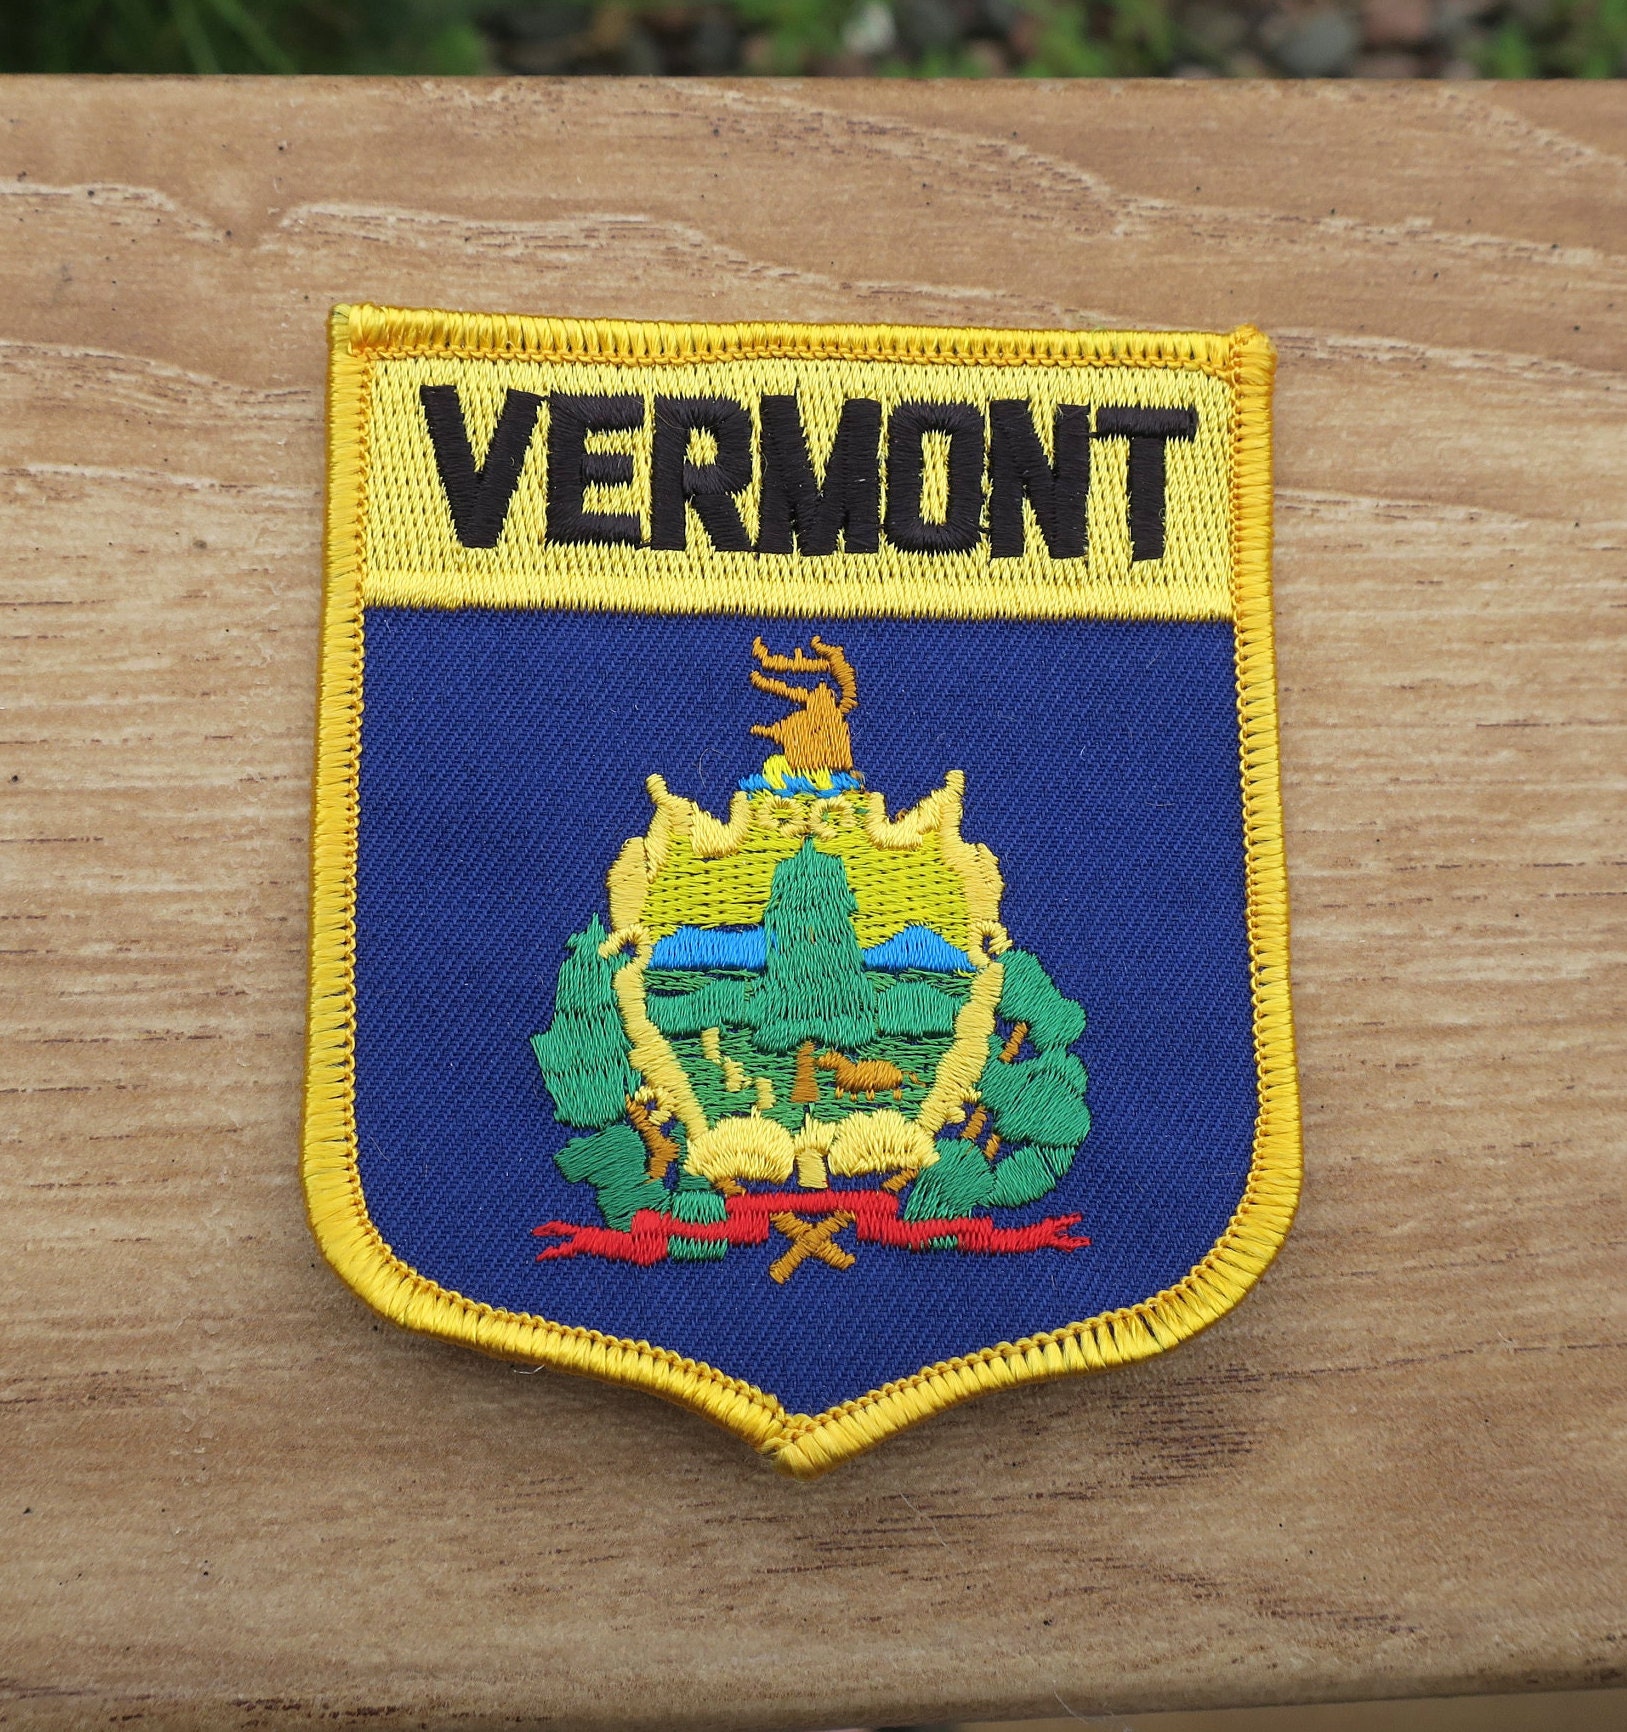 PatchStop Vermont State Iron On Patches for Clothing Backpacks Jeans, Black  and White Motorcycle Patch Sew On Custom Jackets Hats Tactical Bags